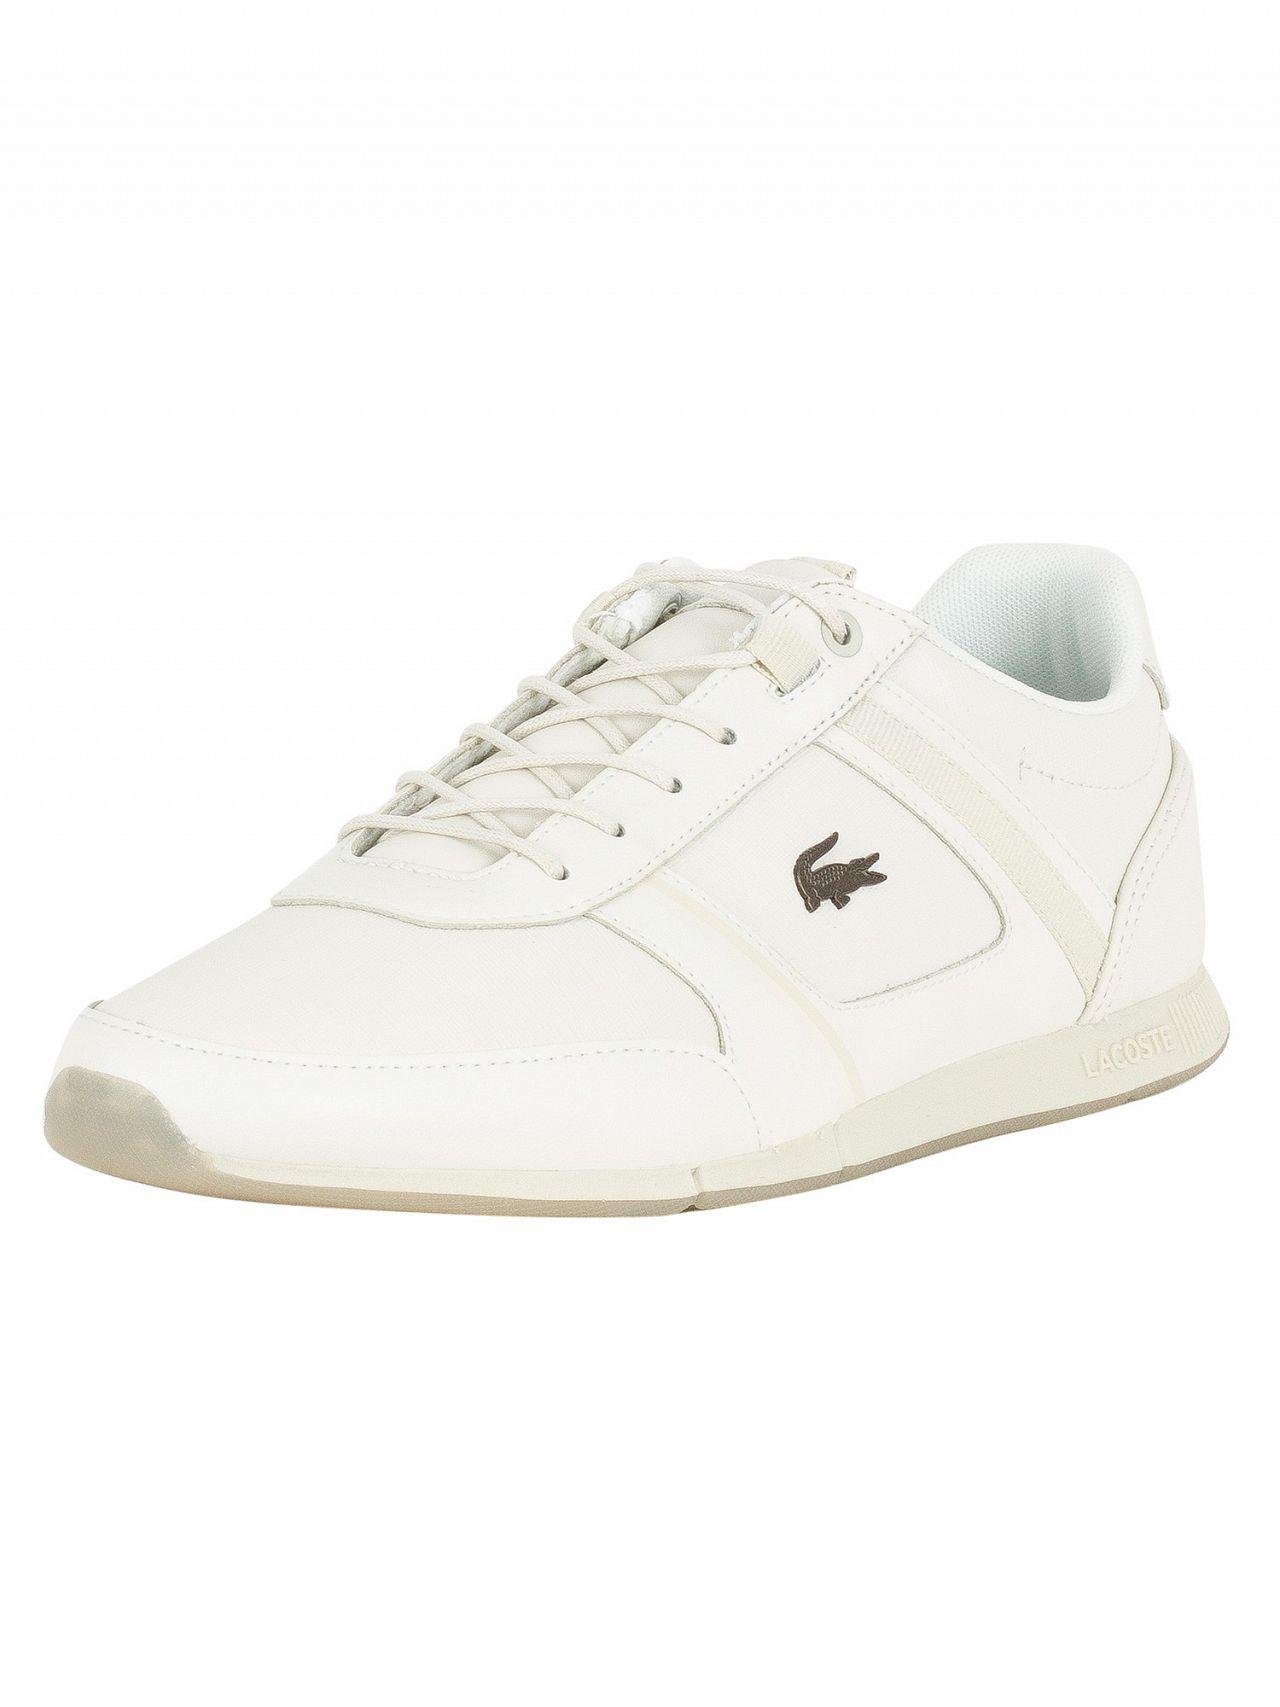 Lacoste Leather Off White Menerva 318 2 Cam Trainers for Men - Lyst